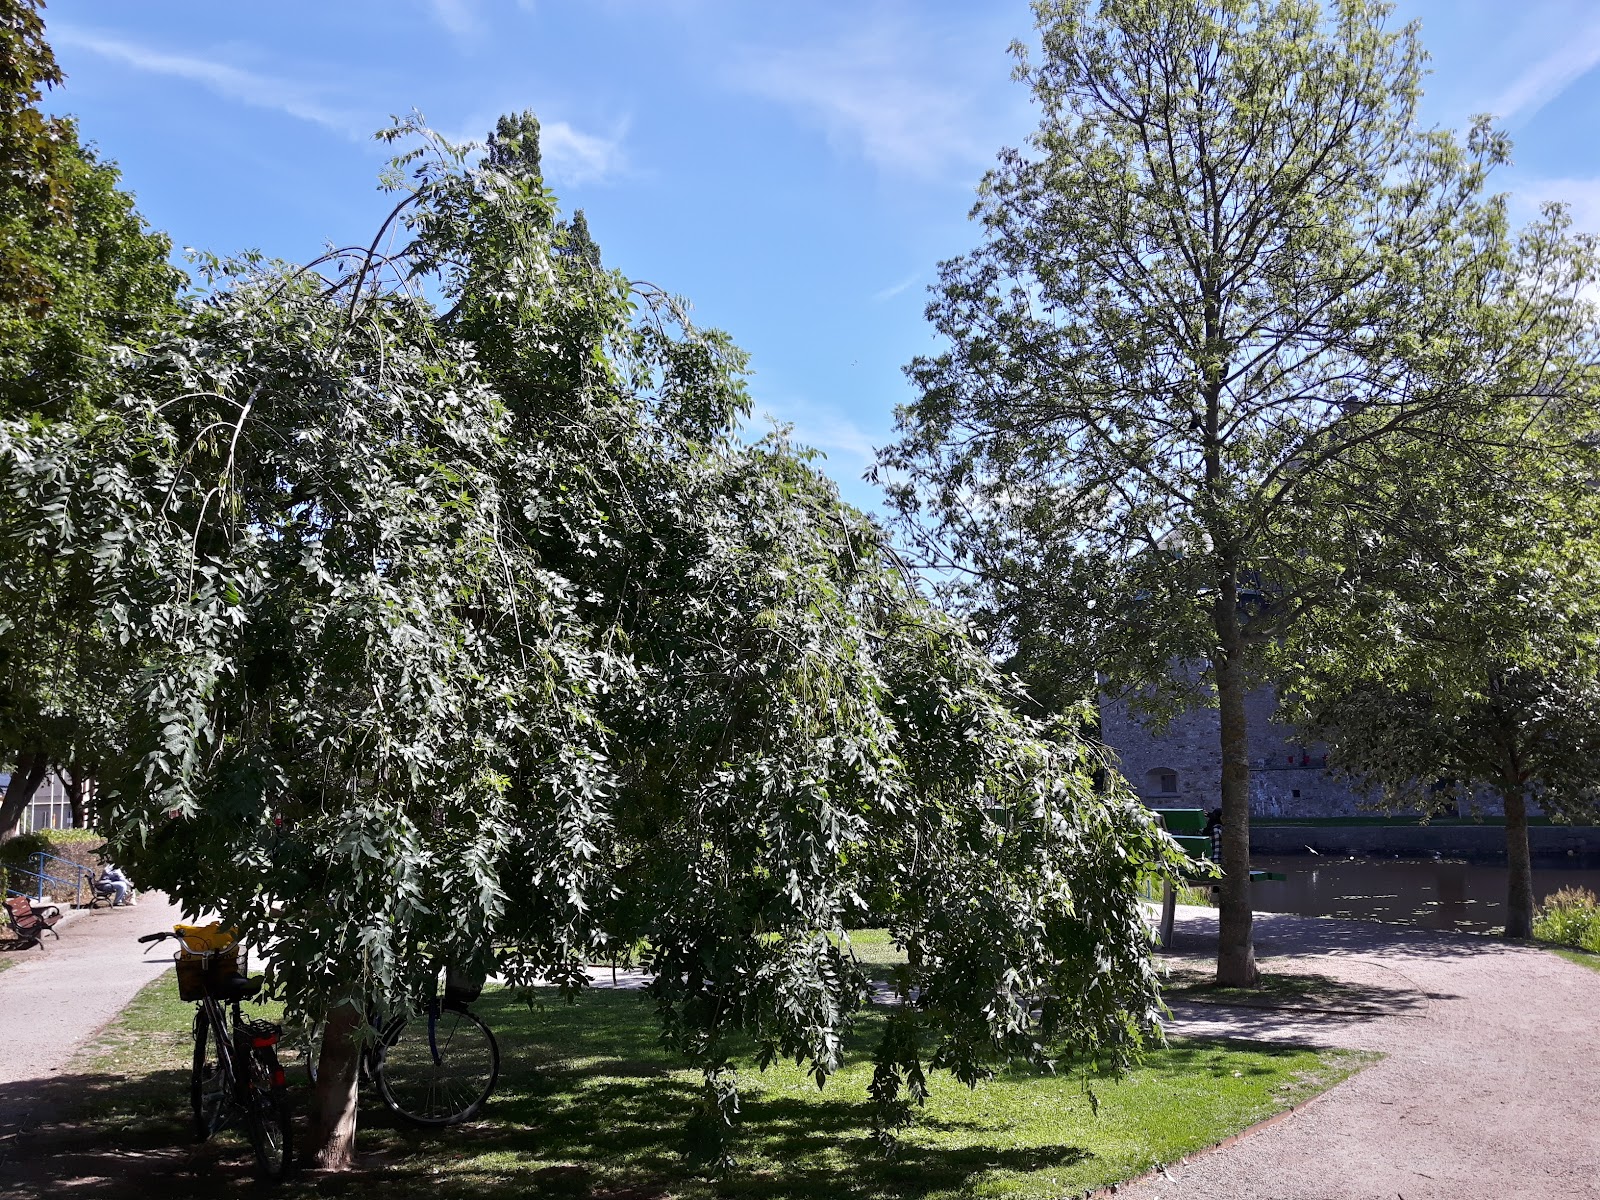 https://upload.wikimedia.org/wikipedia/commons/3/3a/Ash_tree_and_Weeping_ash.jpg